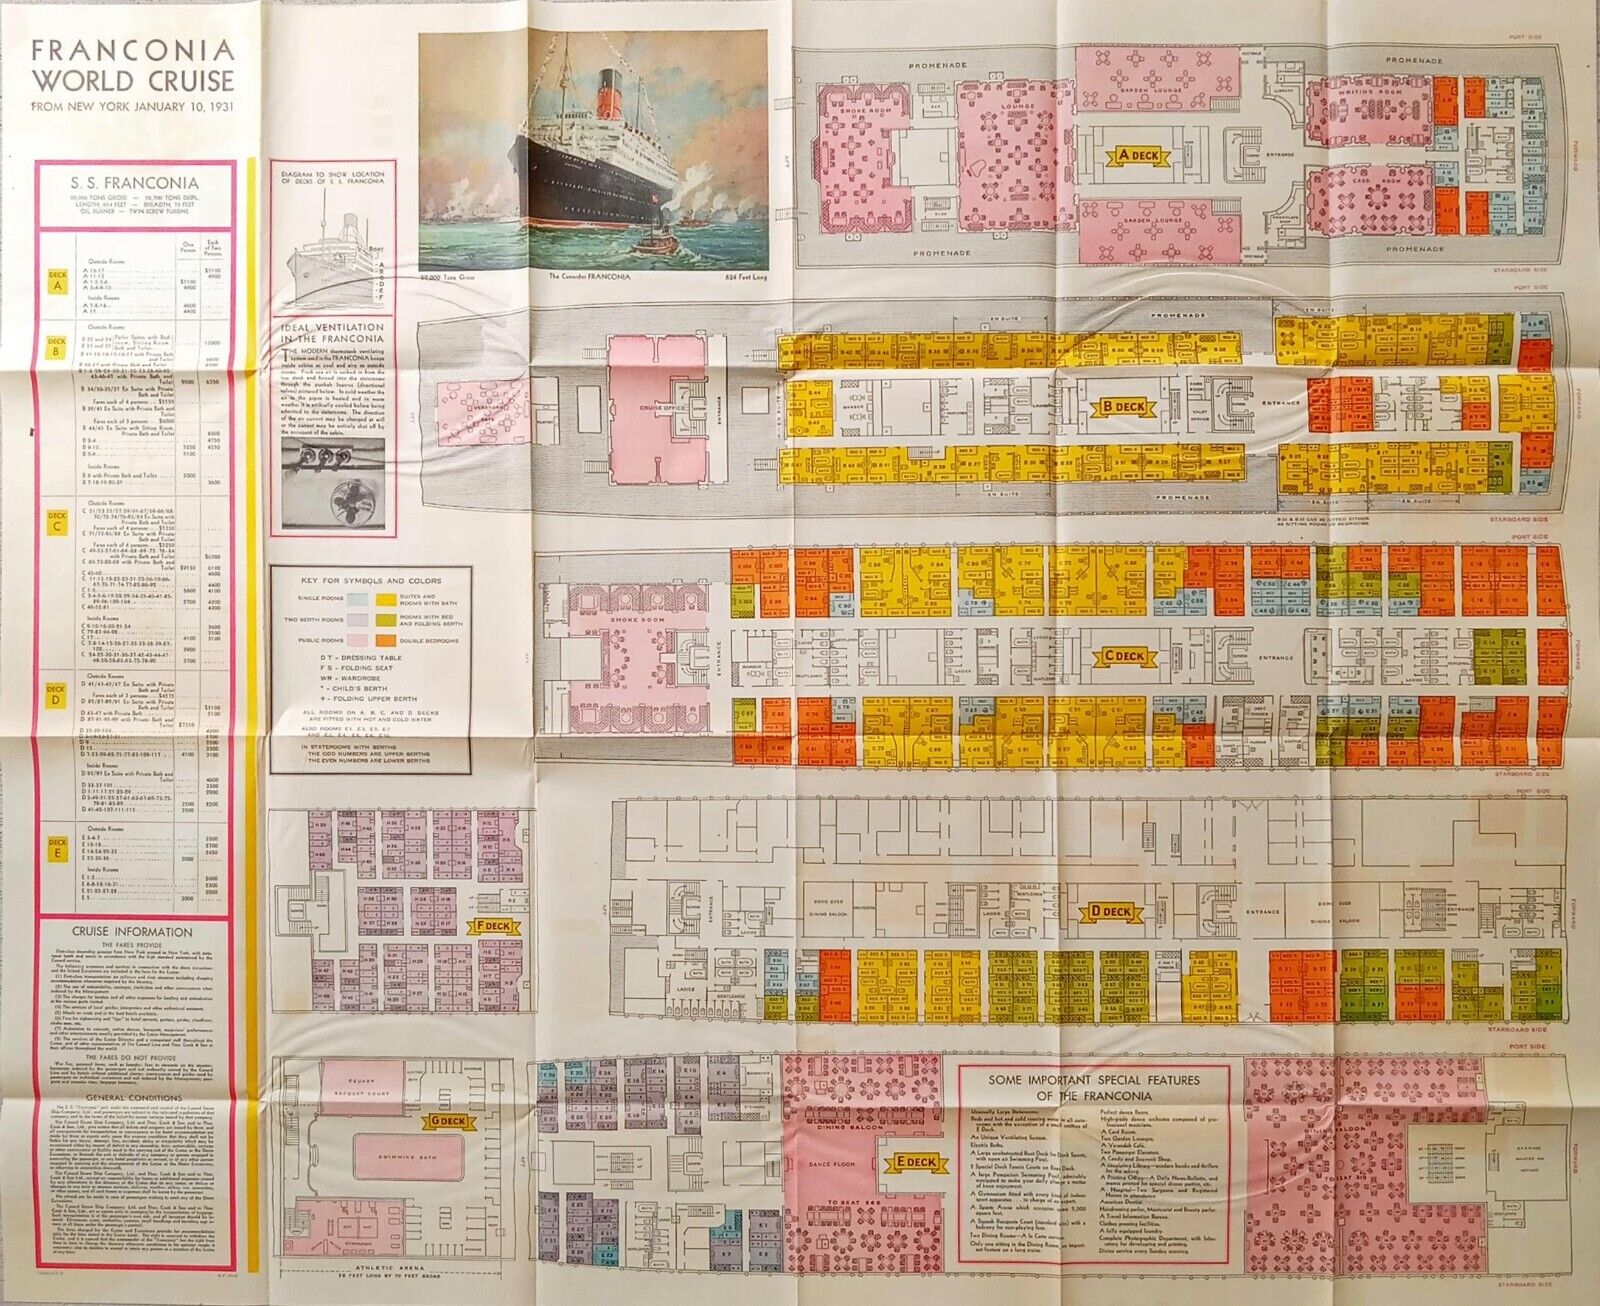 SS FRANCONIA Cunard Line 1931 World Cruise Brochure Fold Out Deck Plans